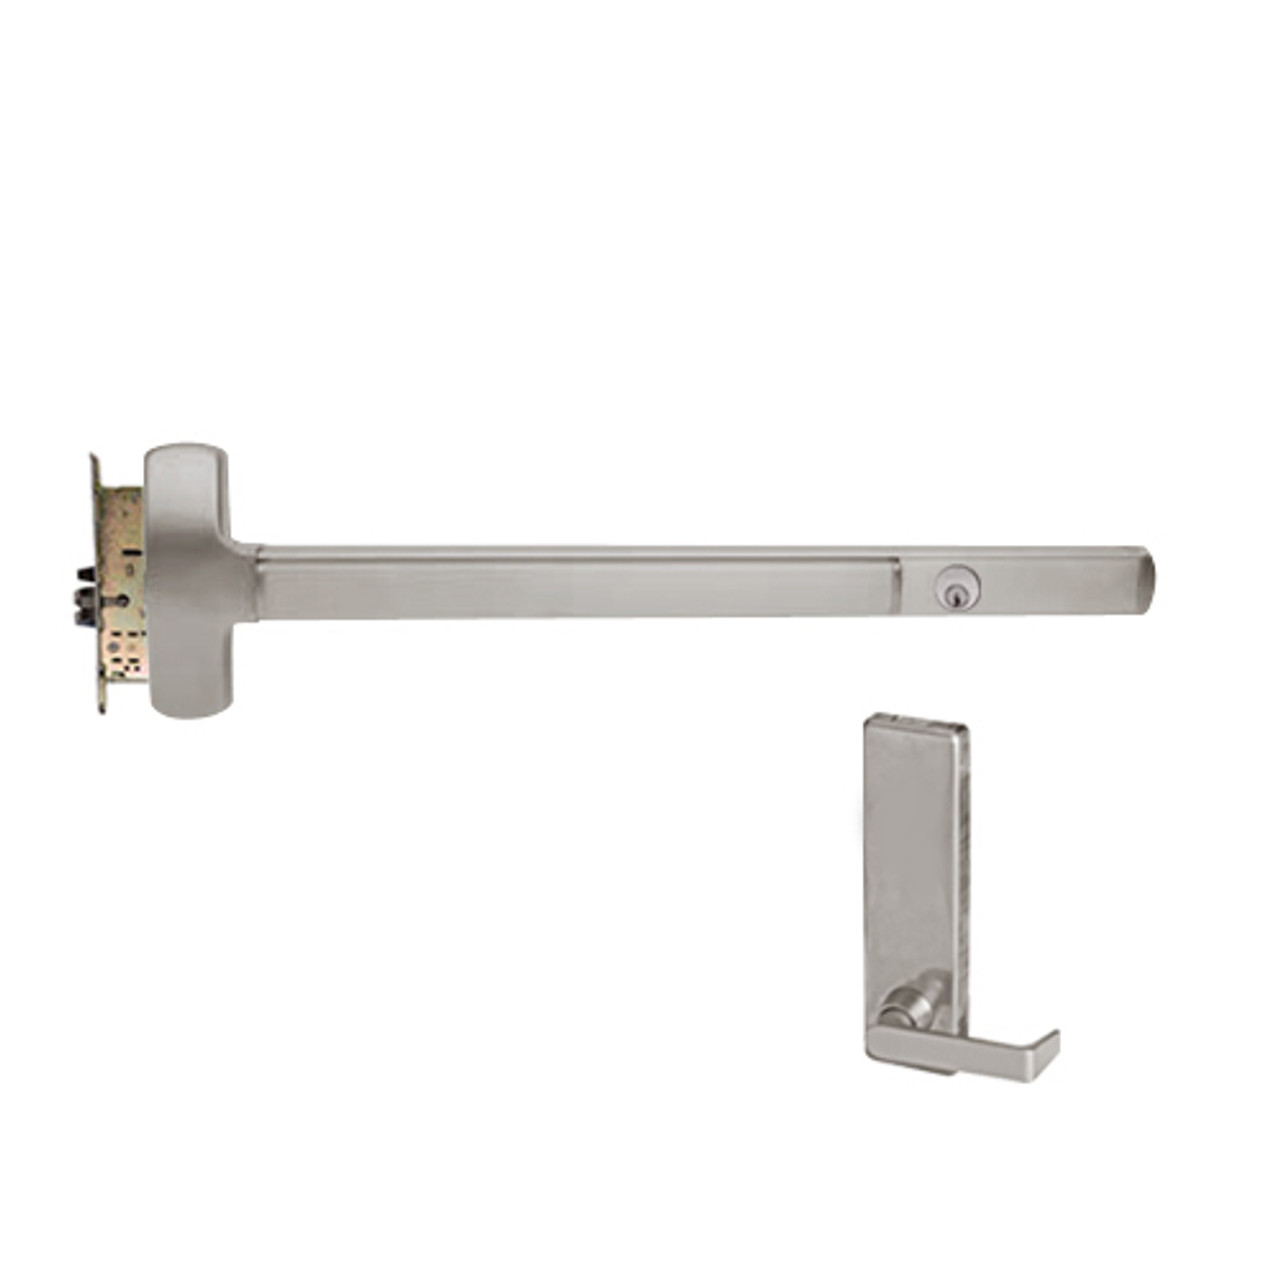 CD25-M-L-DT-DANE-US32D-4-RHR Falcon Exit Device in Satin Stainless Steel